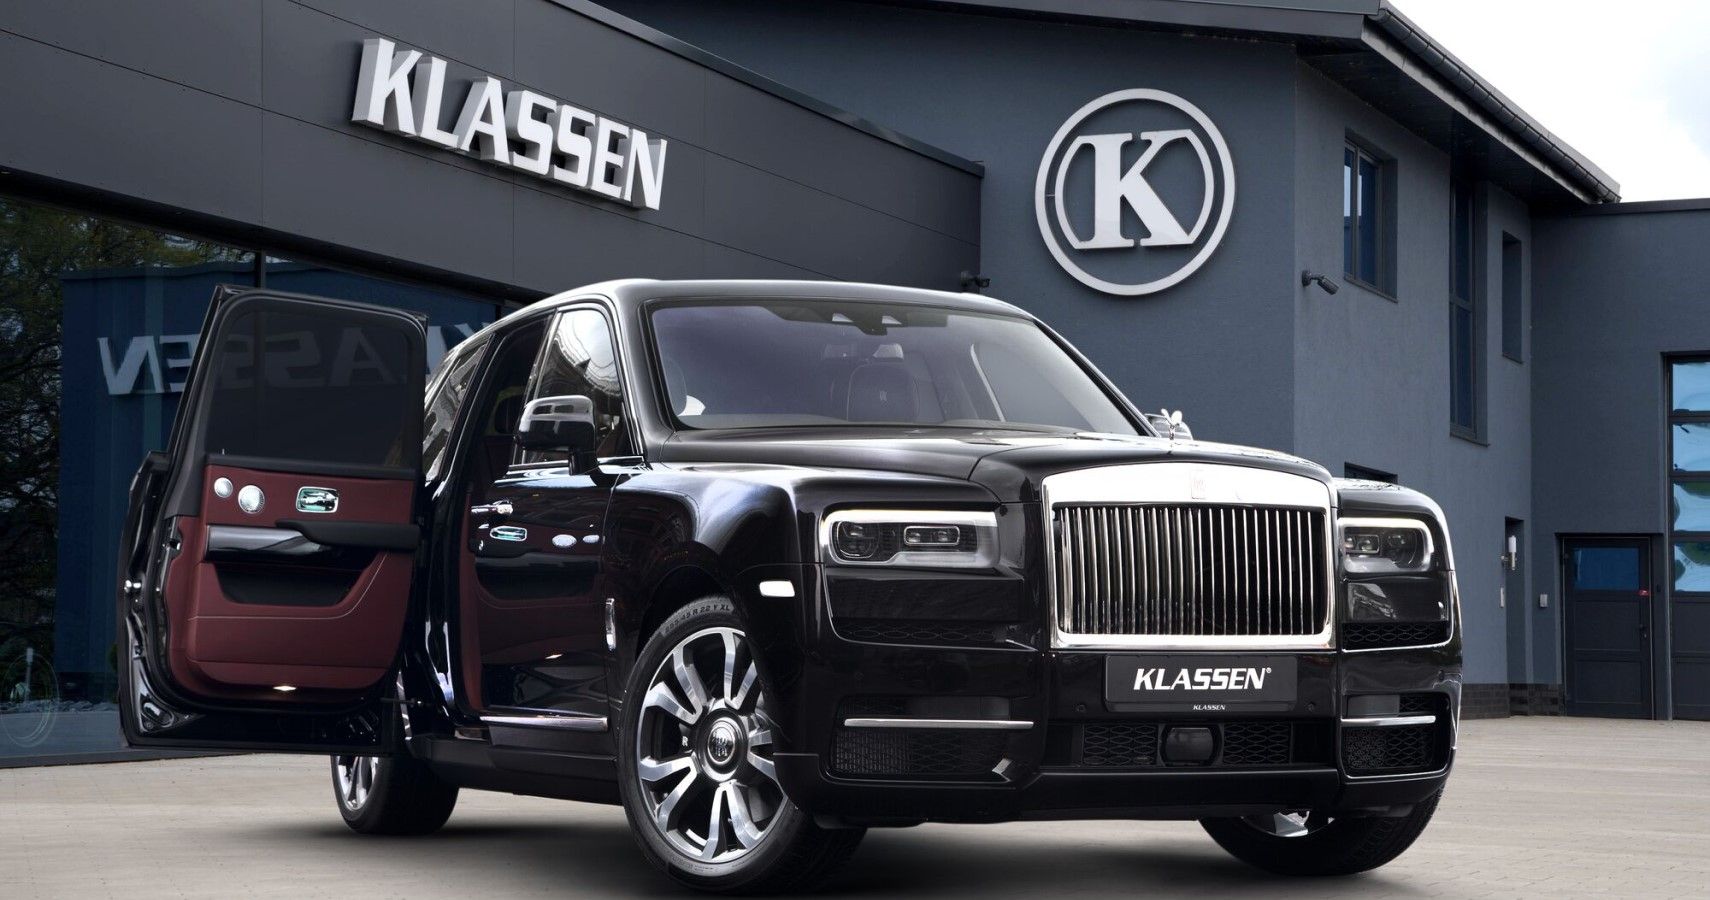 Armored Klassen Rolls-Royce Cullinan takes 3 months to be modified from a standard Cullinan